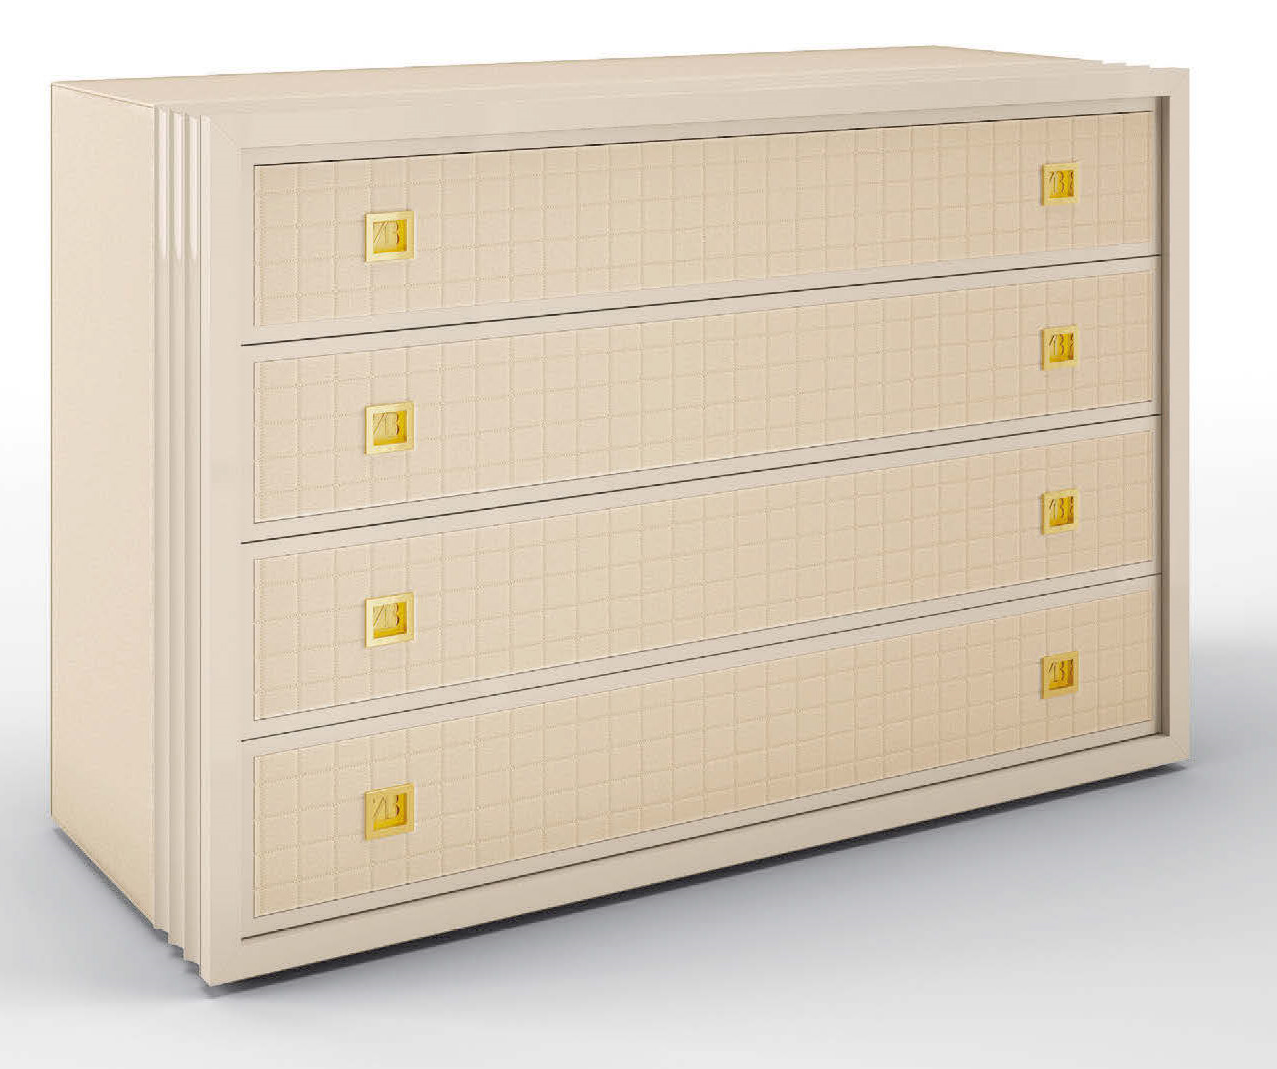 Chest of Drawers Elegant Angelic Chords Chest Of Drawers